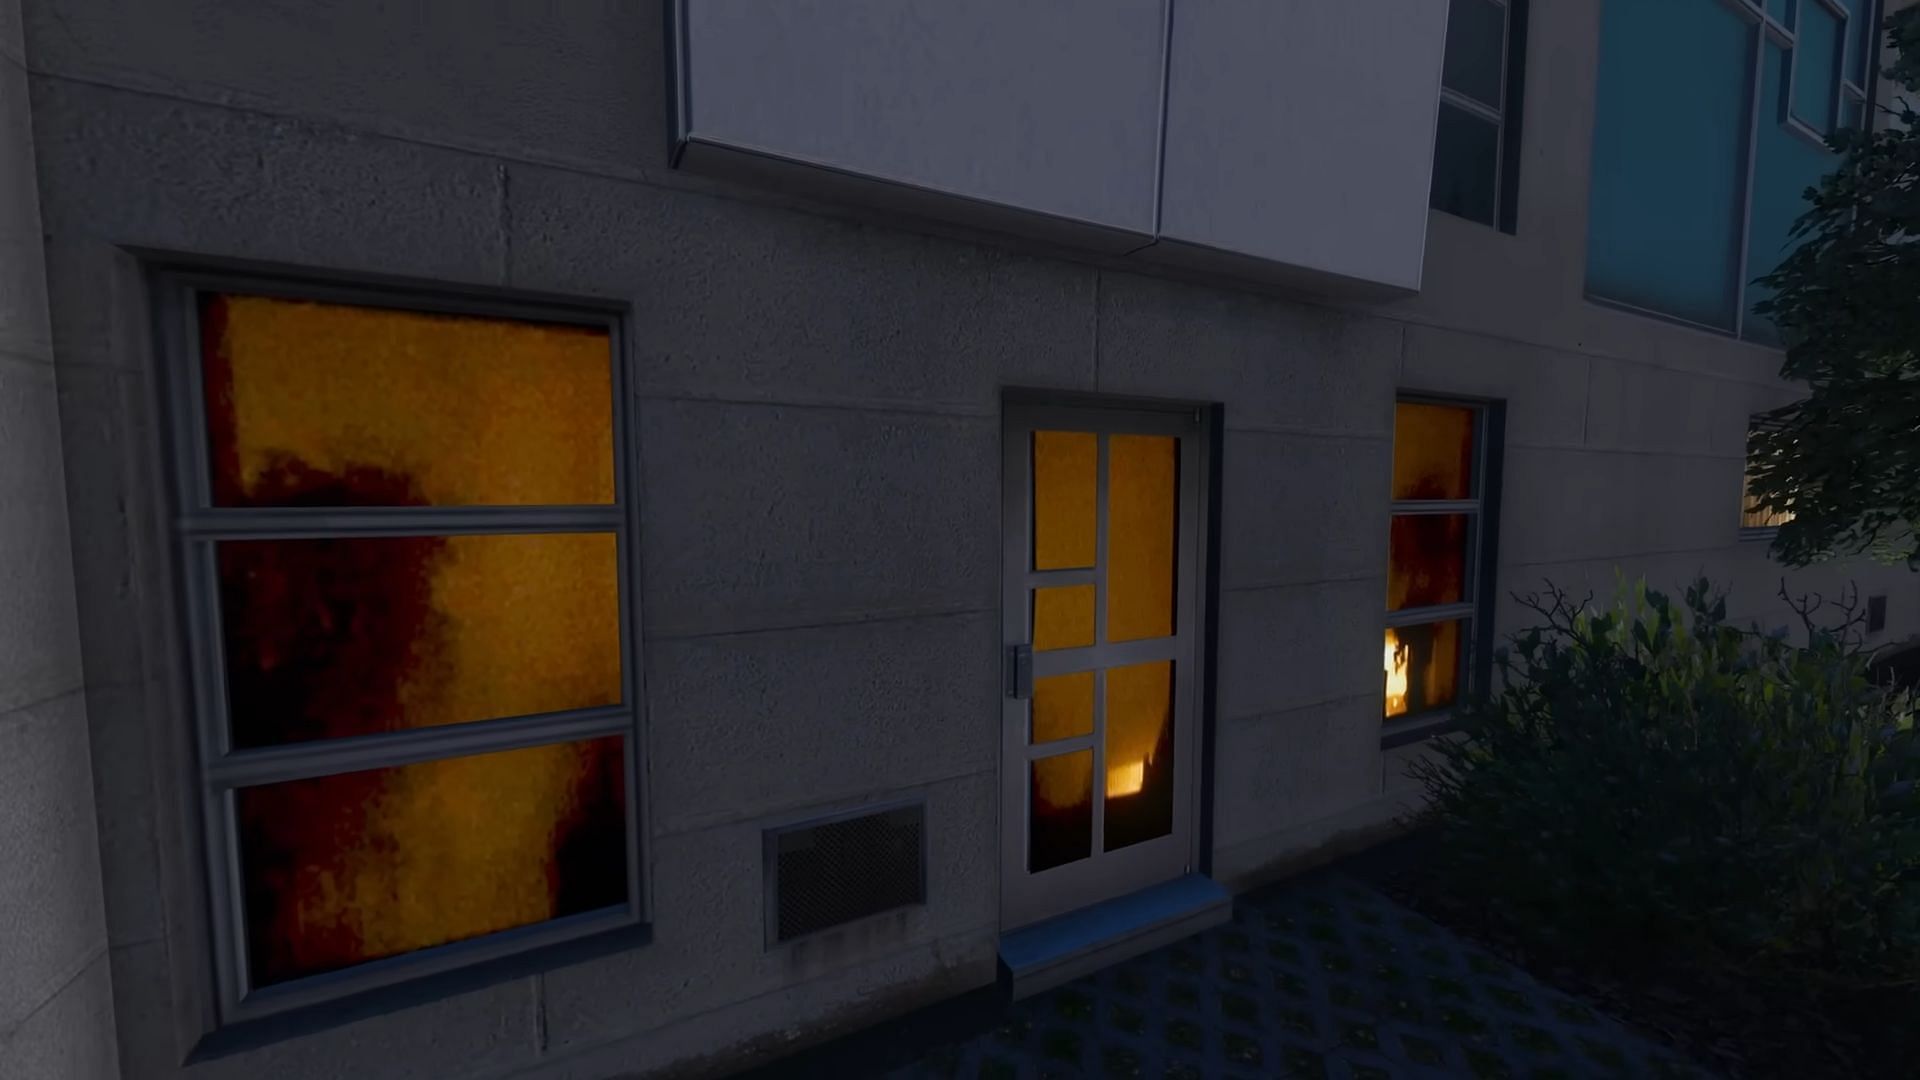 Some of the windows on the house (Image via Rockstar Games || Syrup, YouTube)